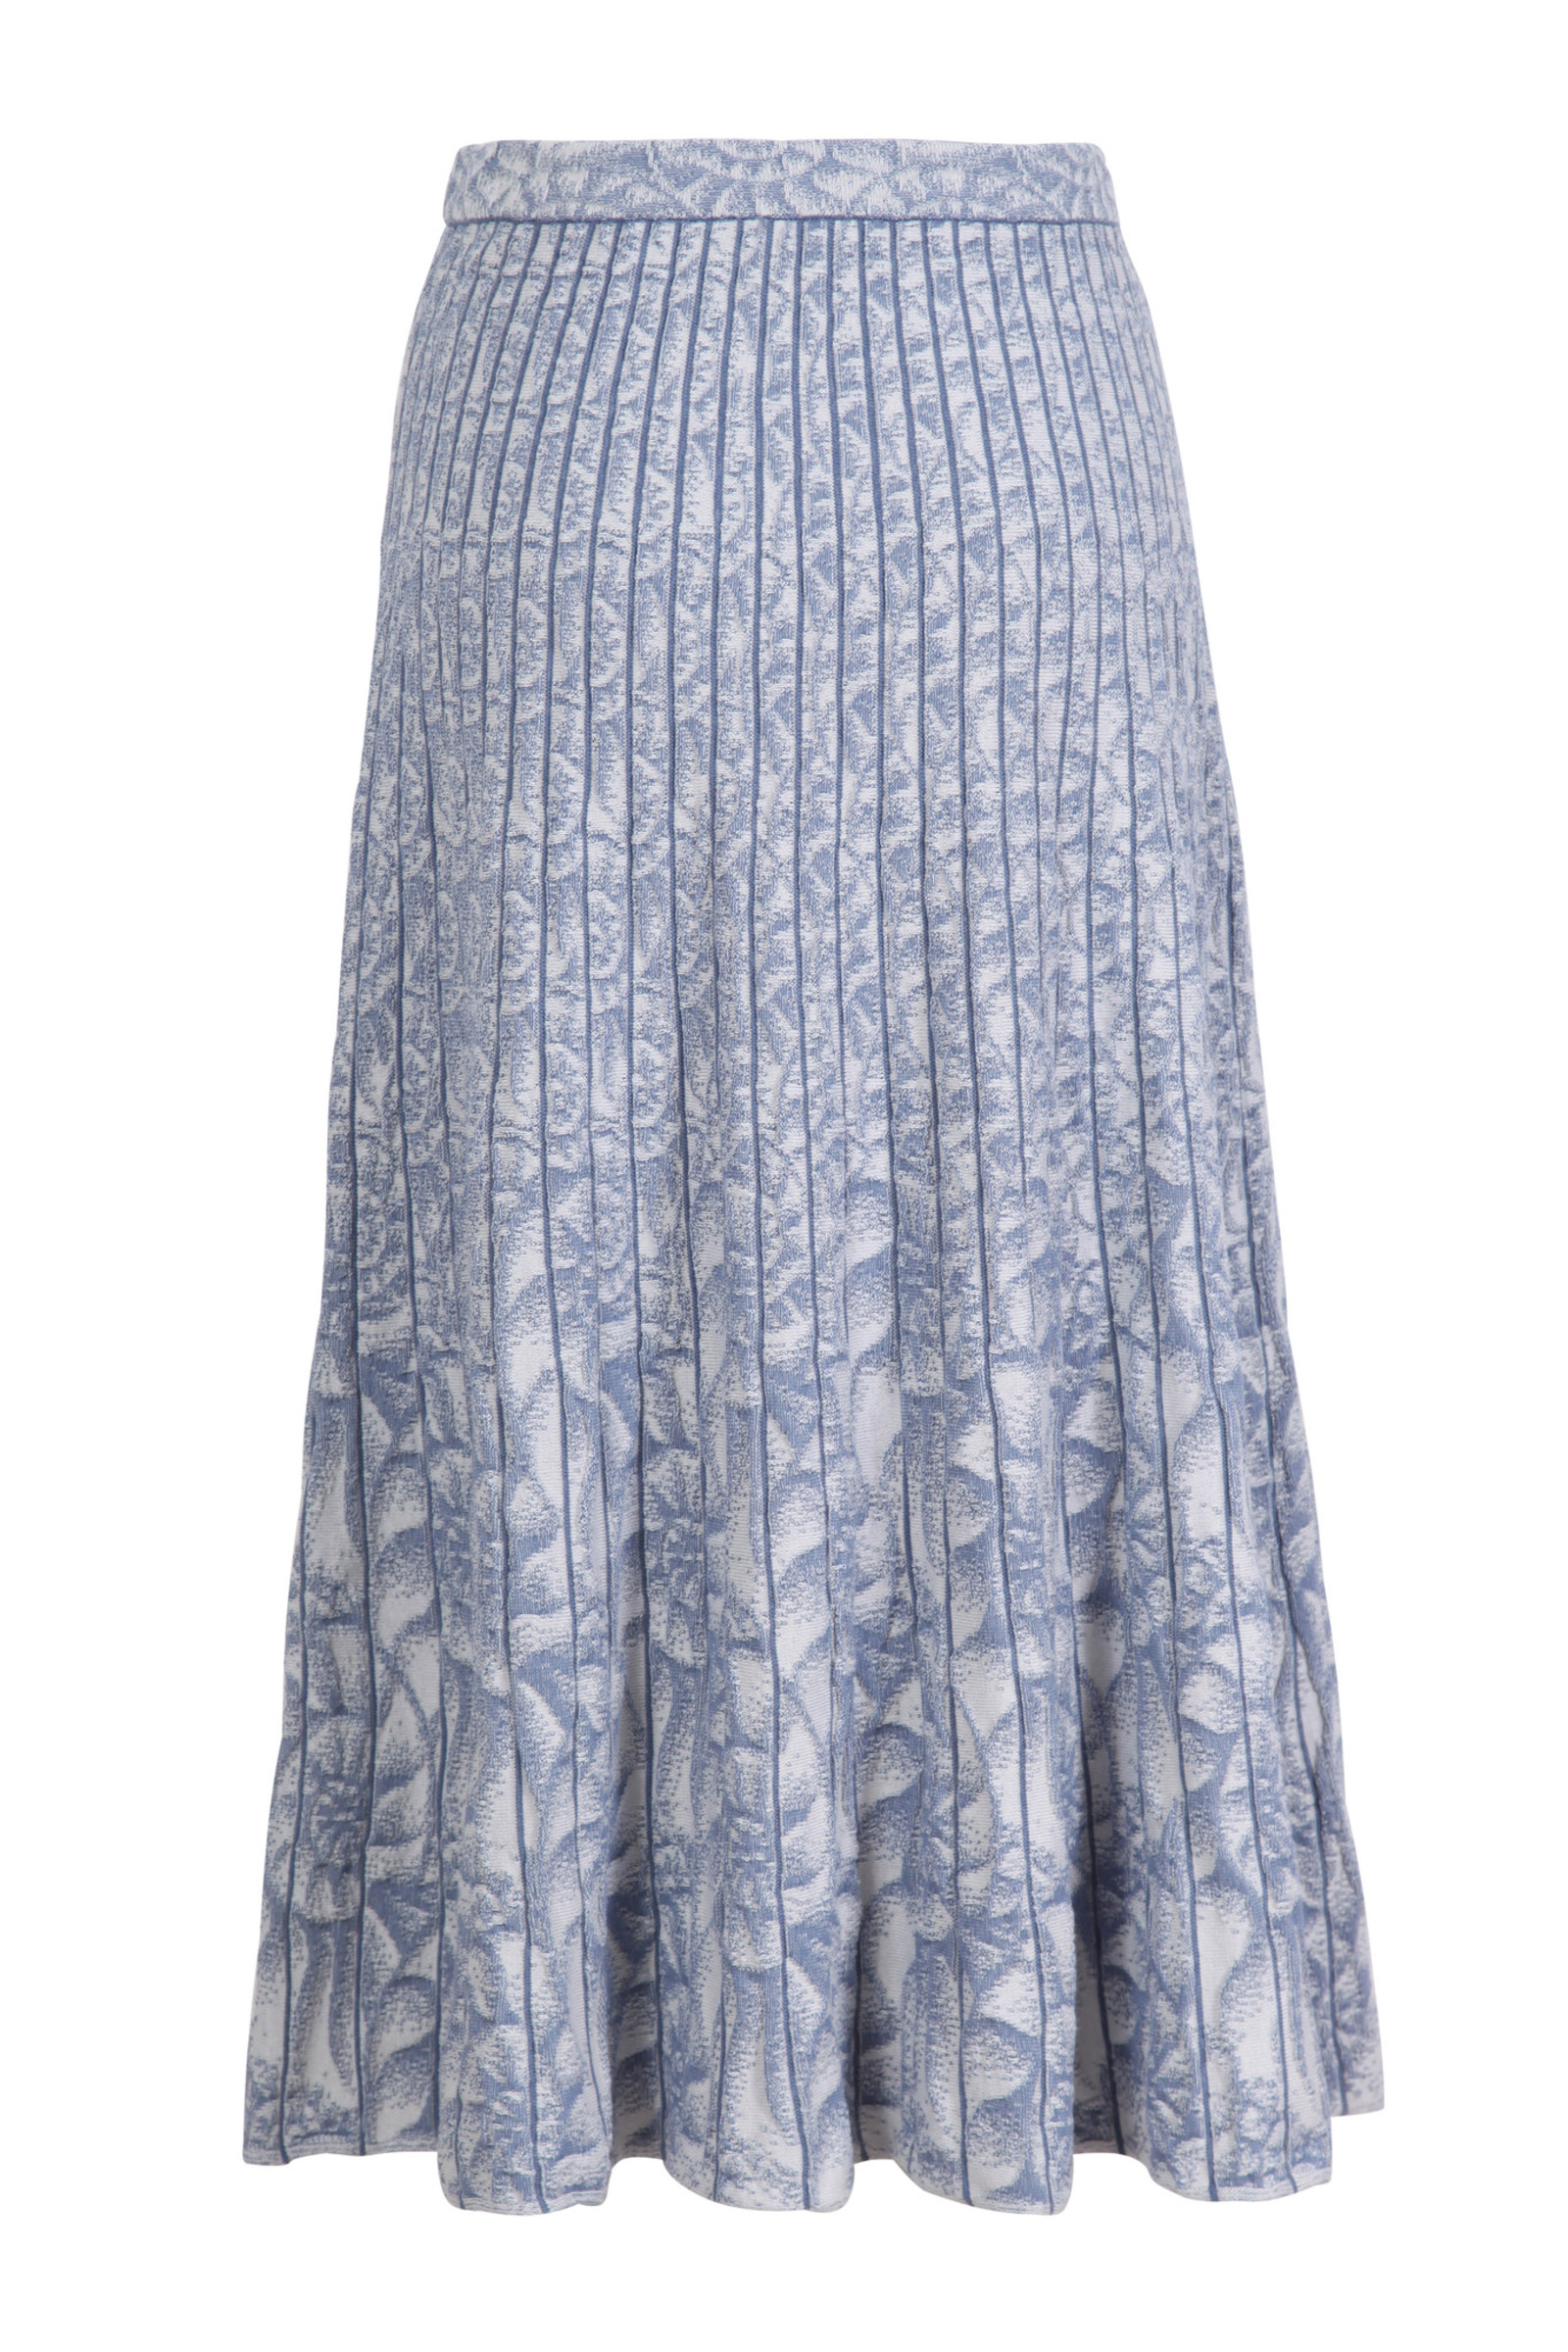 IVKO  Woman IVKO Outlet - Skirt with Pleats Sea Shell Pattern Stone Blue